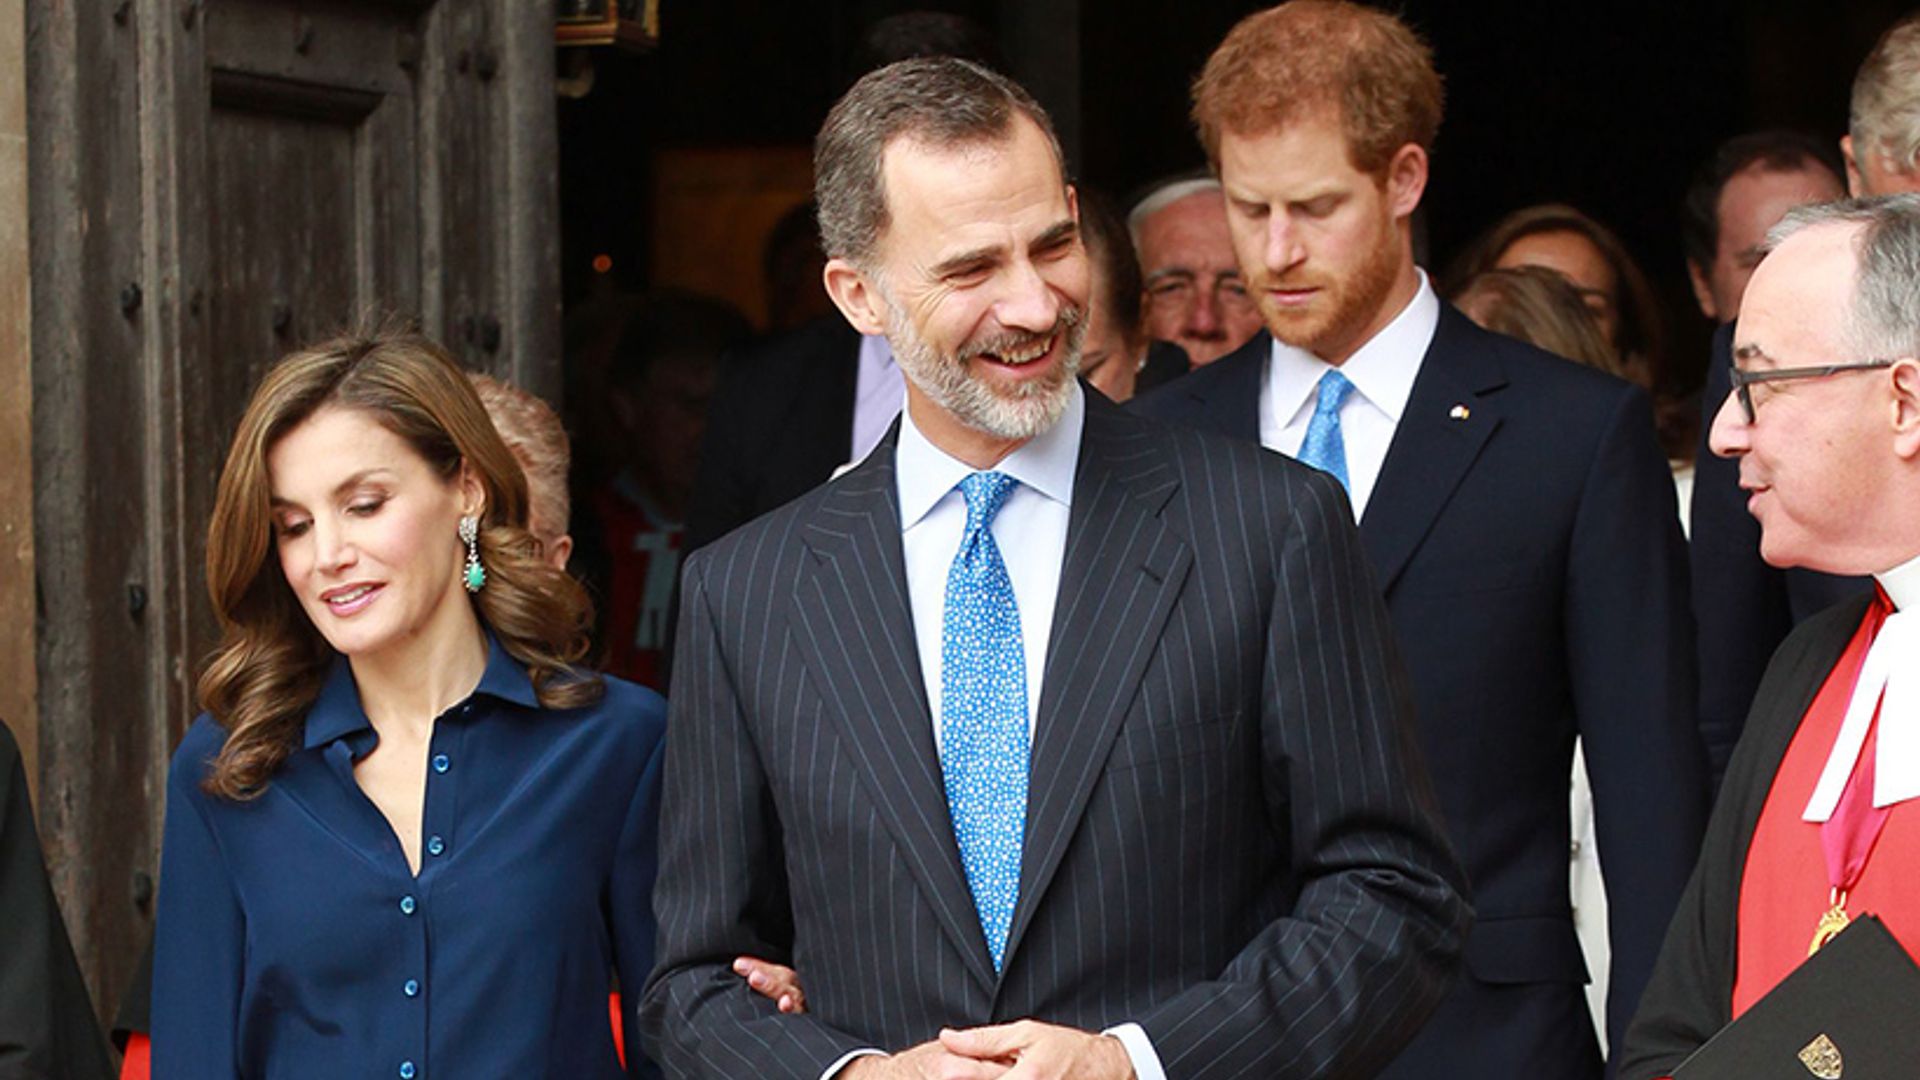 Prince Harry takes part in first state visit by welcoming Spanish royals at Westminster Abbey